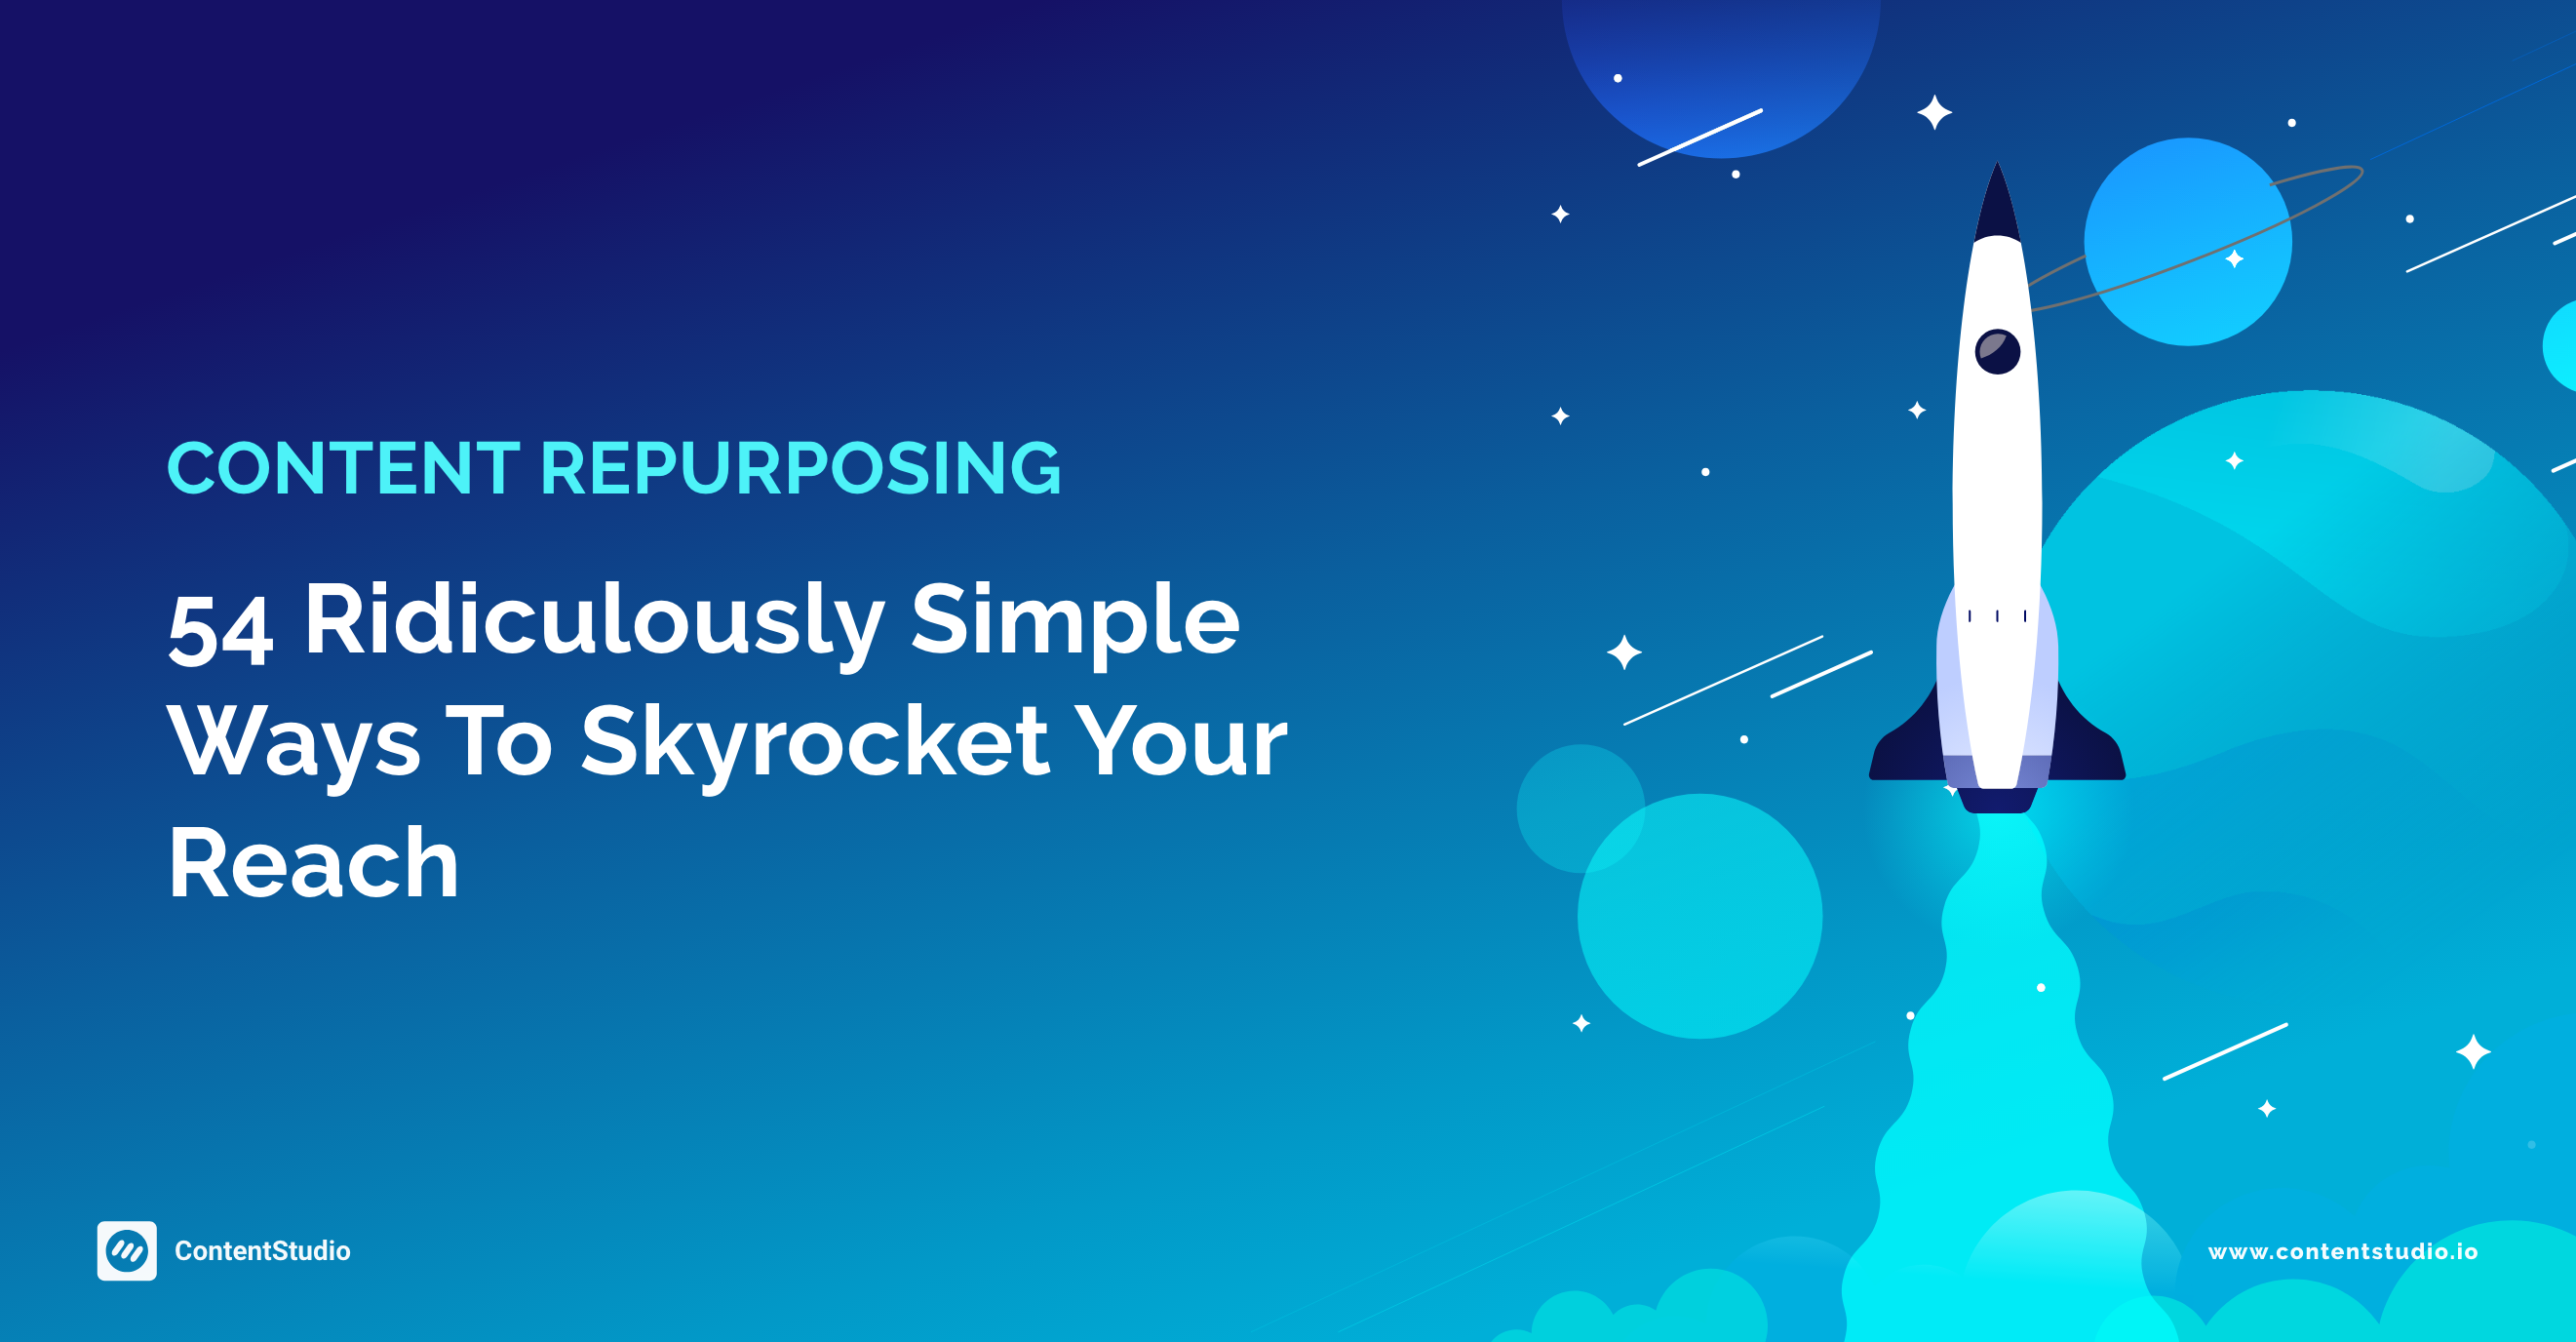 Content Repurposing: 54 Ridiculously Simple Ways to Skyrocket Your Reach